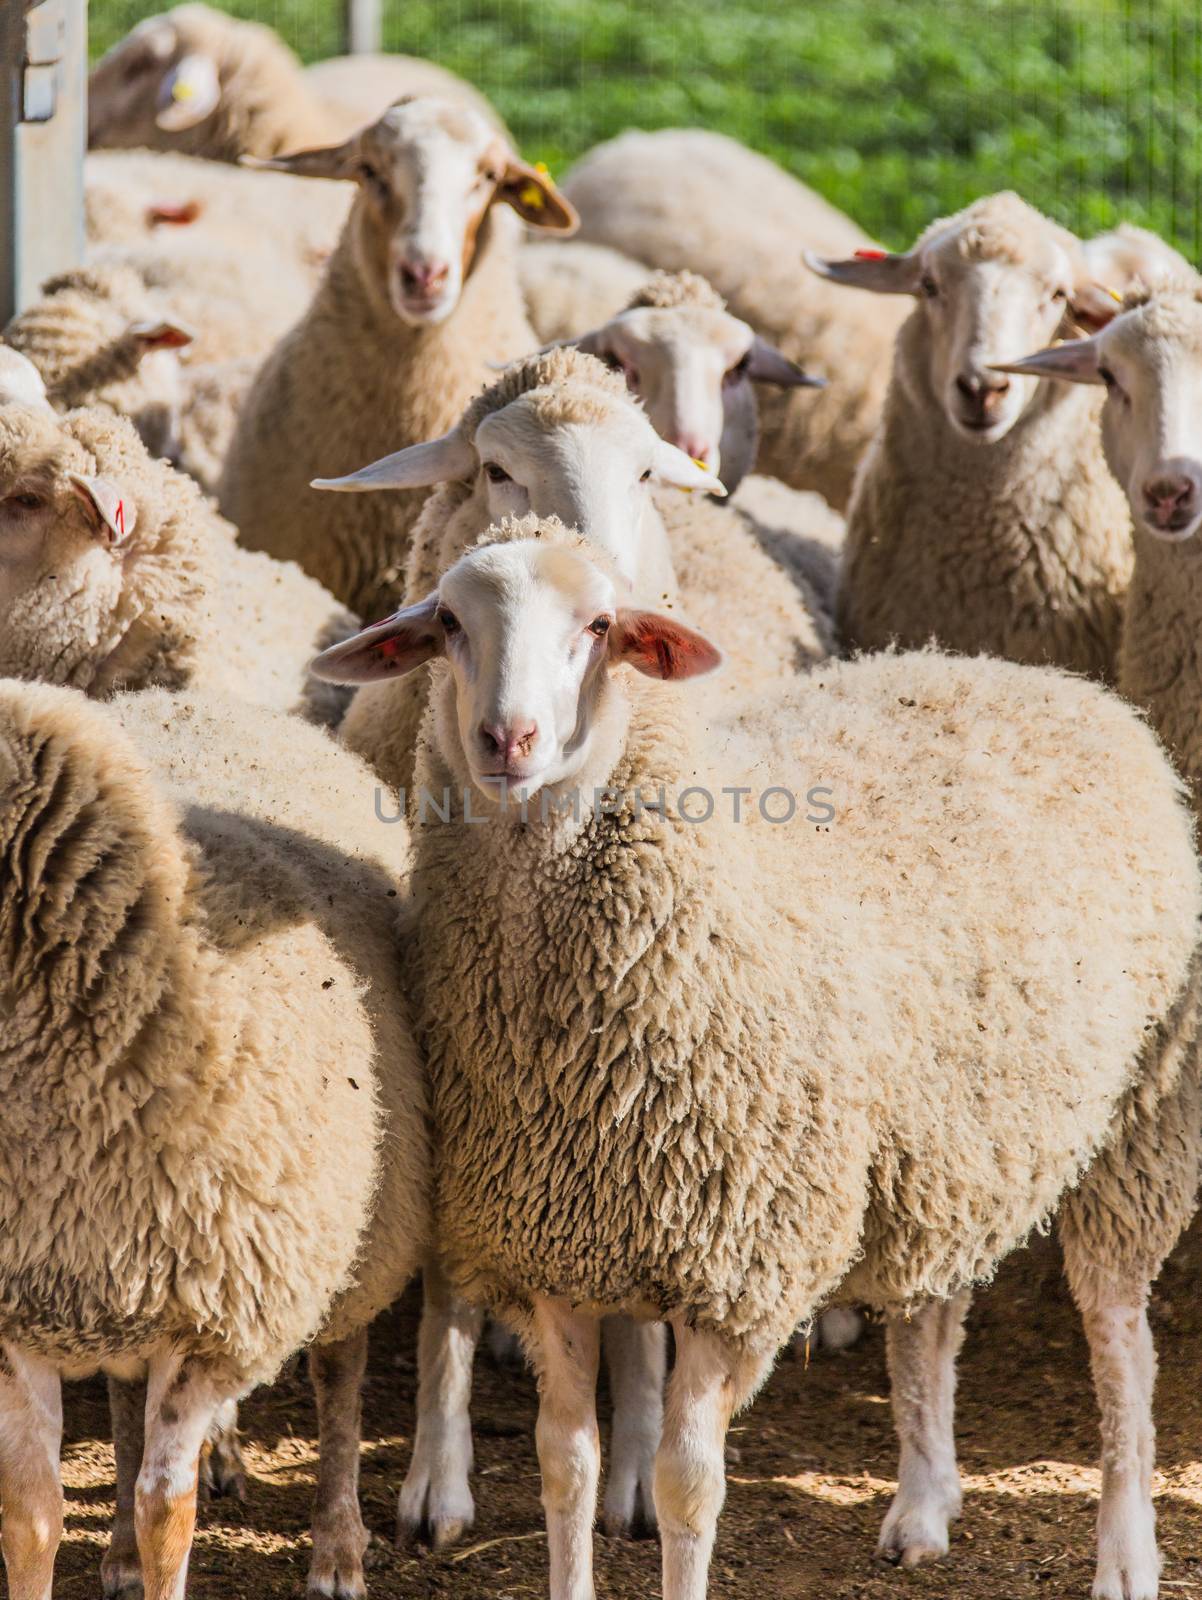 a flock of white sheep in a rural location